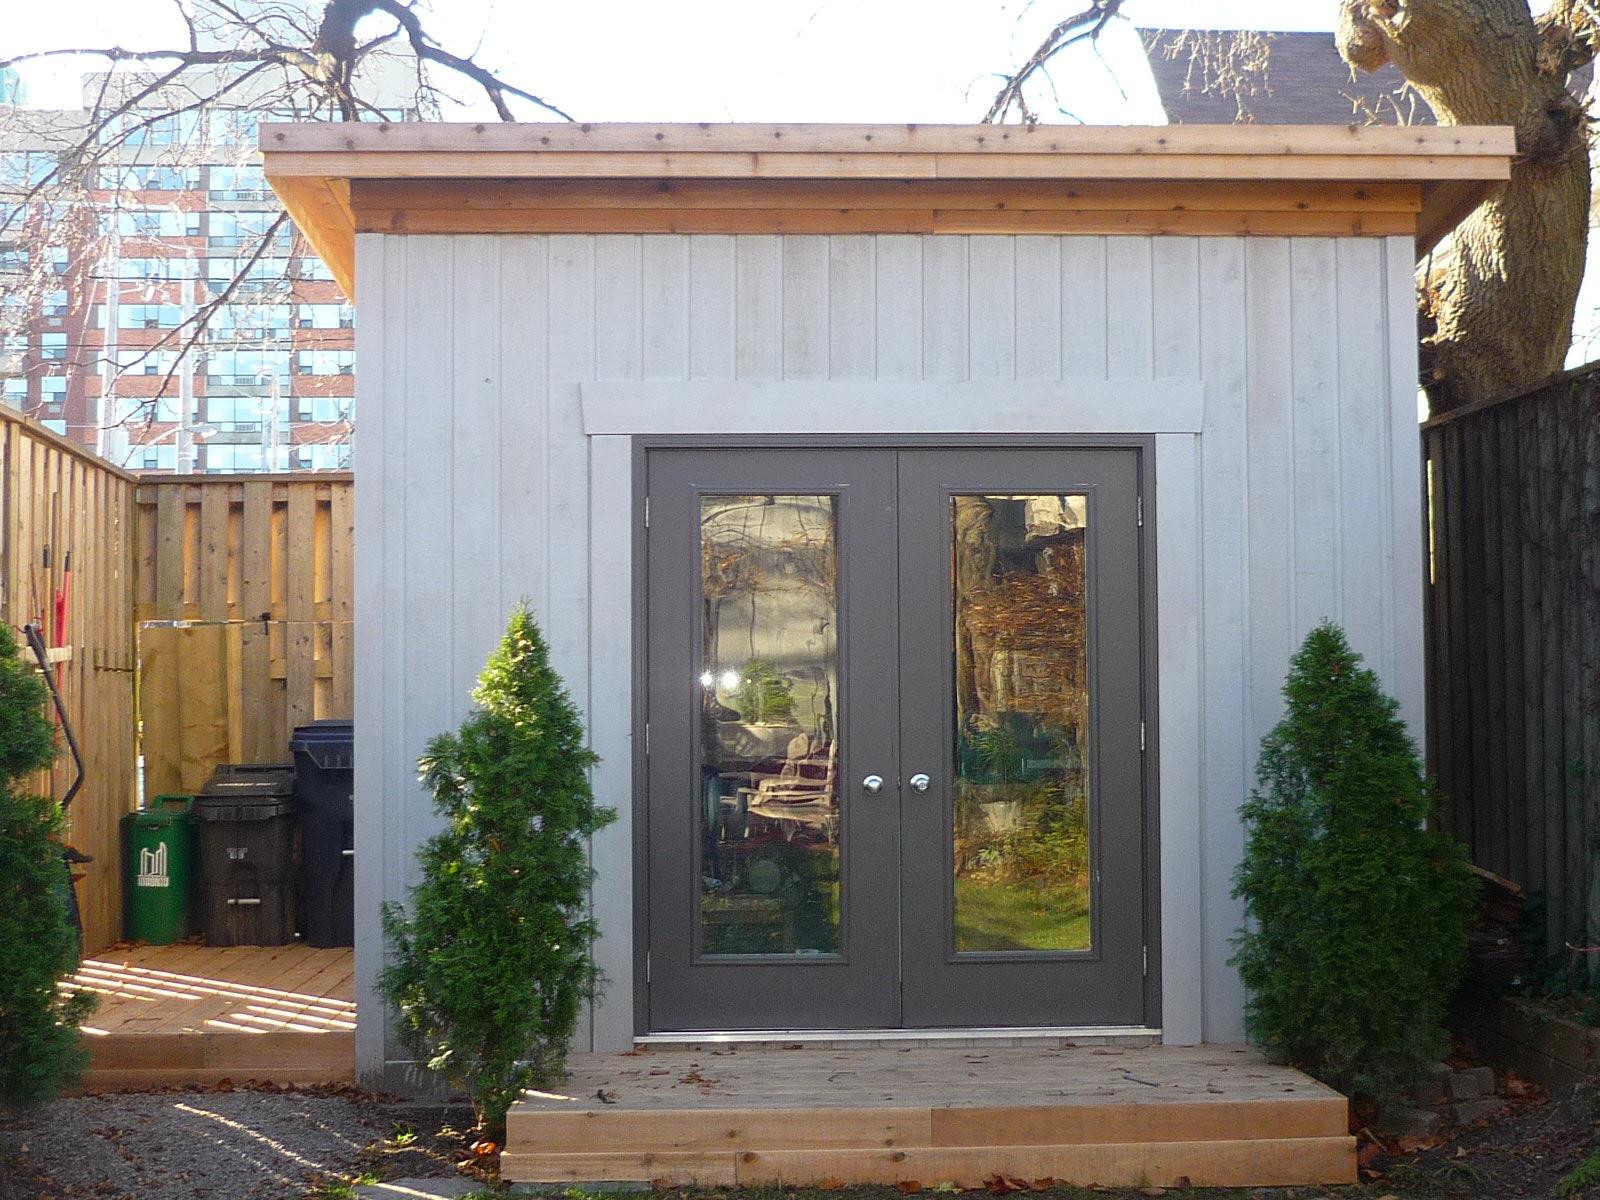 Cedar Urban Studio shed 8x12 with French double doors in Toronto, Ontario. ID number 178864-1